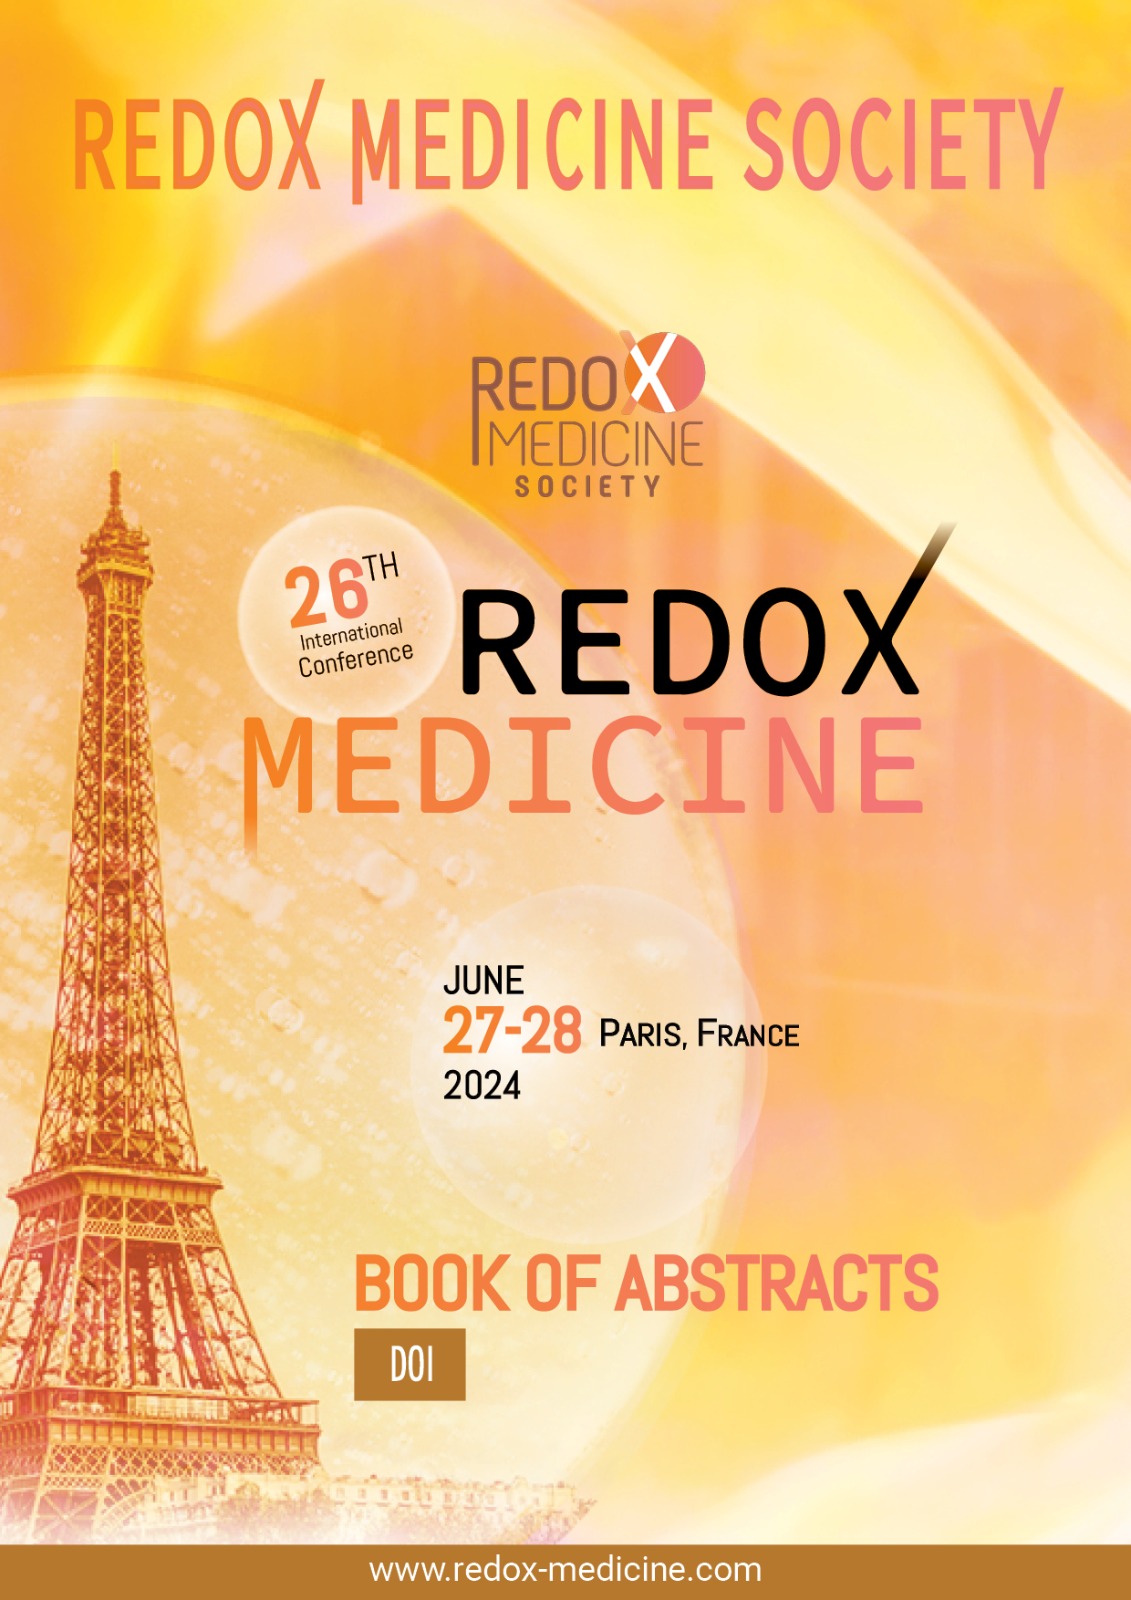 Abstracts Book of Redox Medicine 2024 Has Been Released